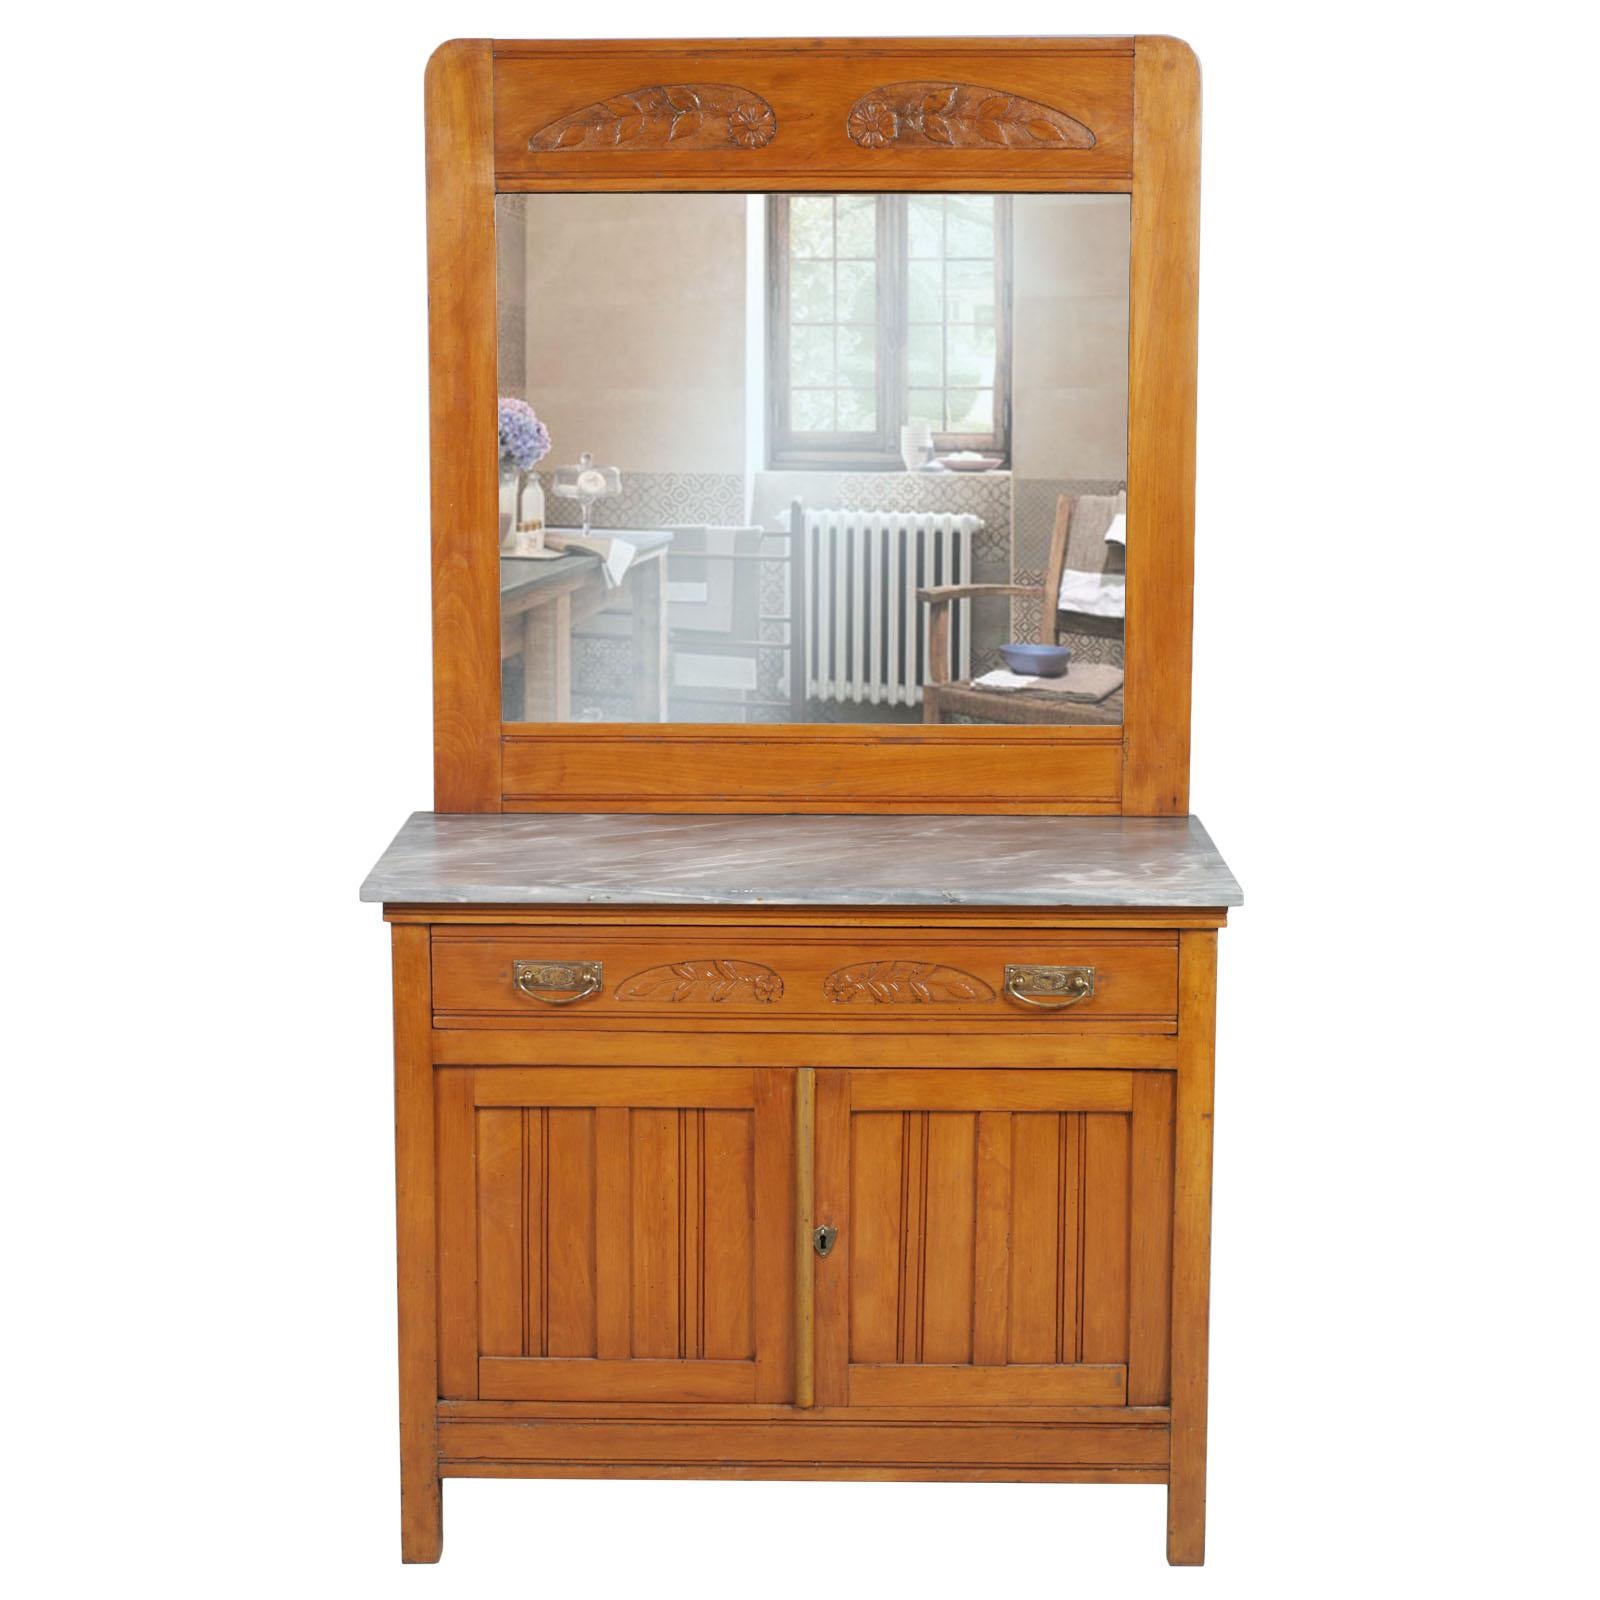 Early 20th century vanity cabinet Art Nouveau in hand carved solid cherrywood with bevelled mirror and marble top. Handles in burnished brass
All solid wood, restored and polished to wax

Cabinet suitable for a modern bathroom with the addition of a